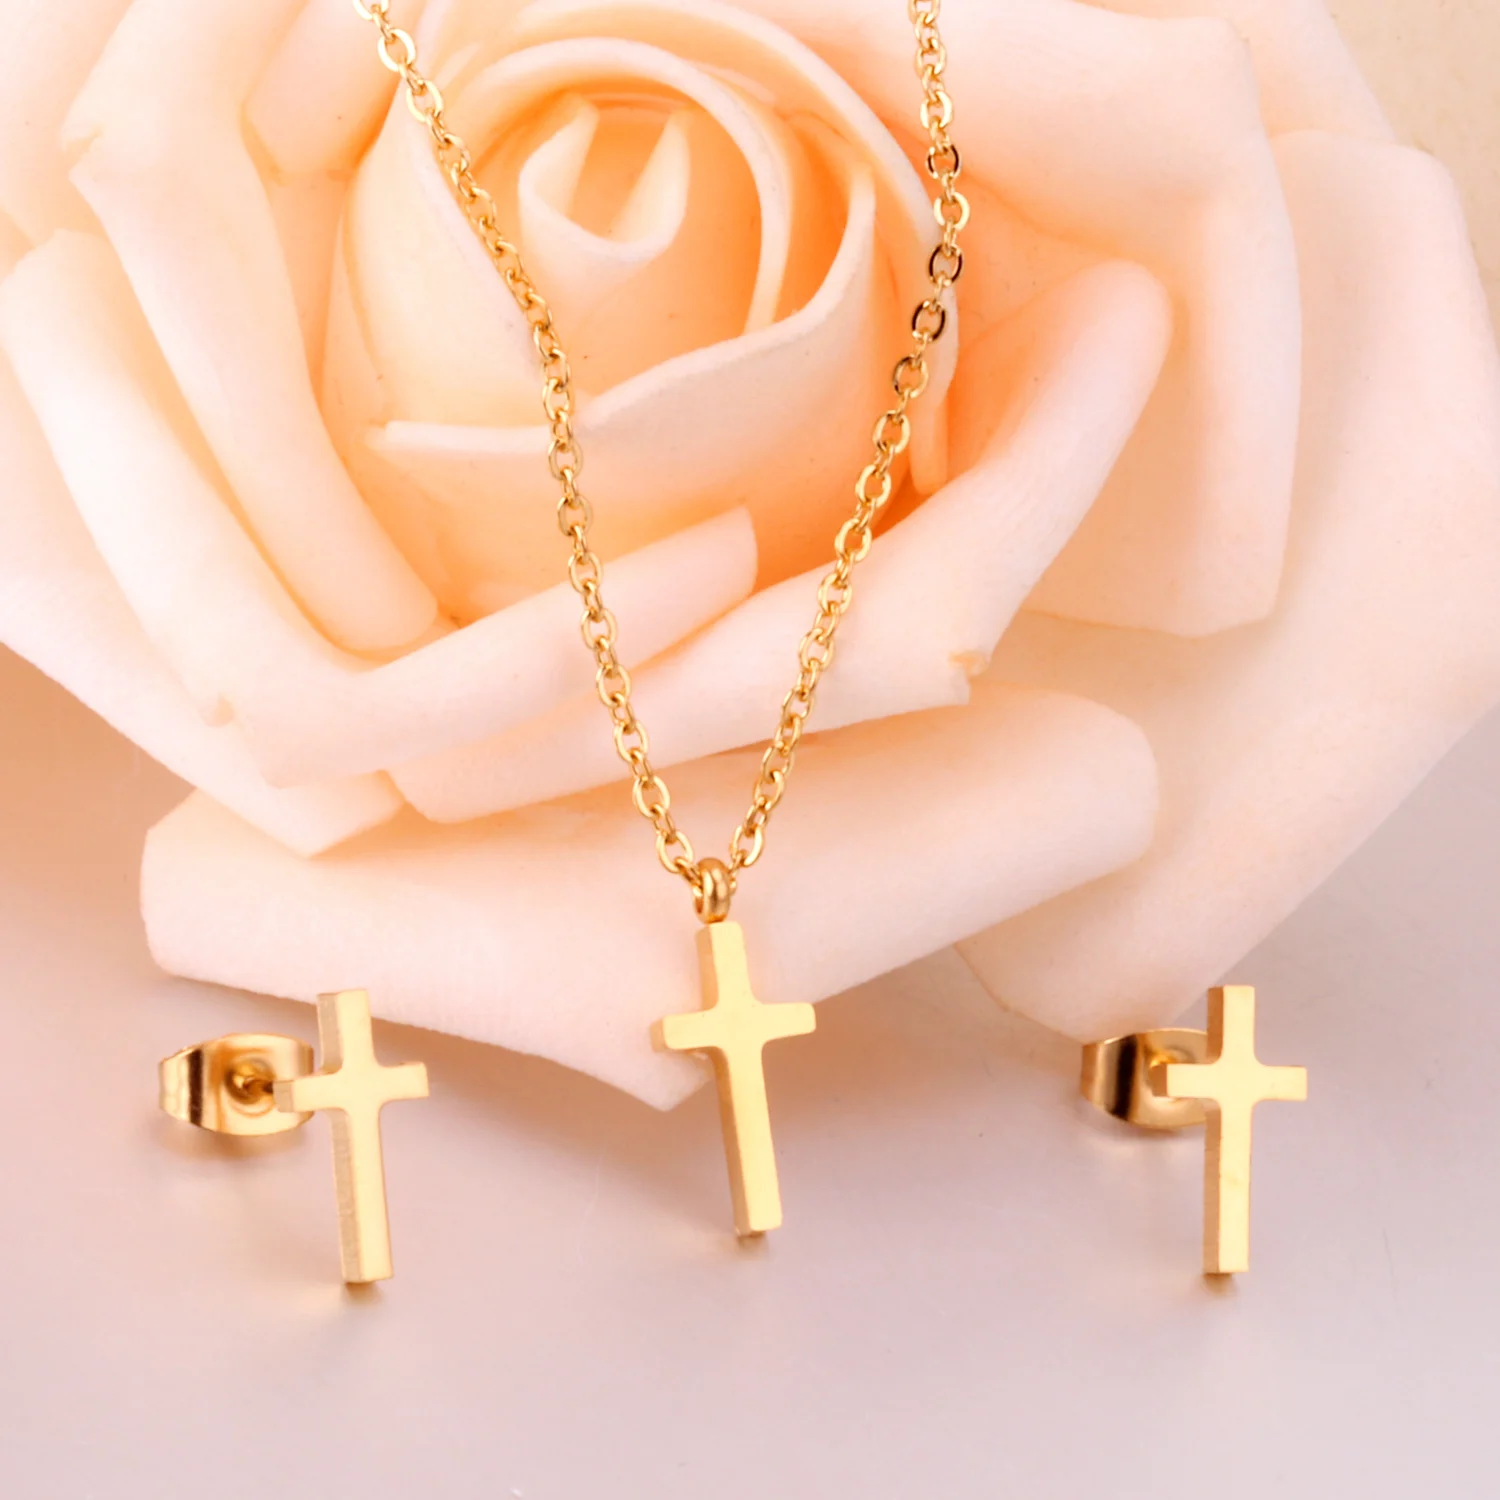 

Cheap Enough Stainless Steel 316L Titanium Gold Filled/Silver Cross Charm Popular Jesus Cross Necklace Earrings Jewelry Sets